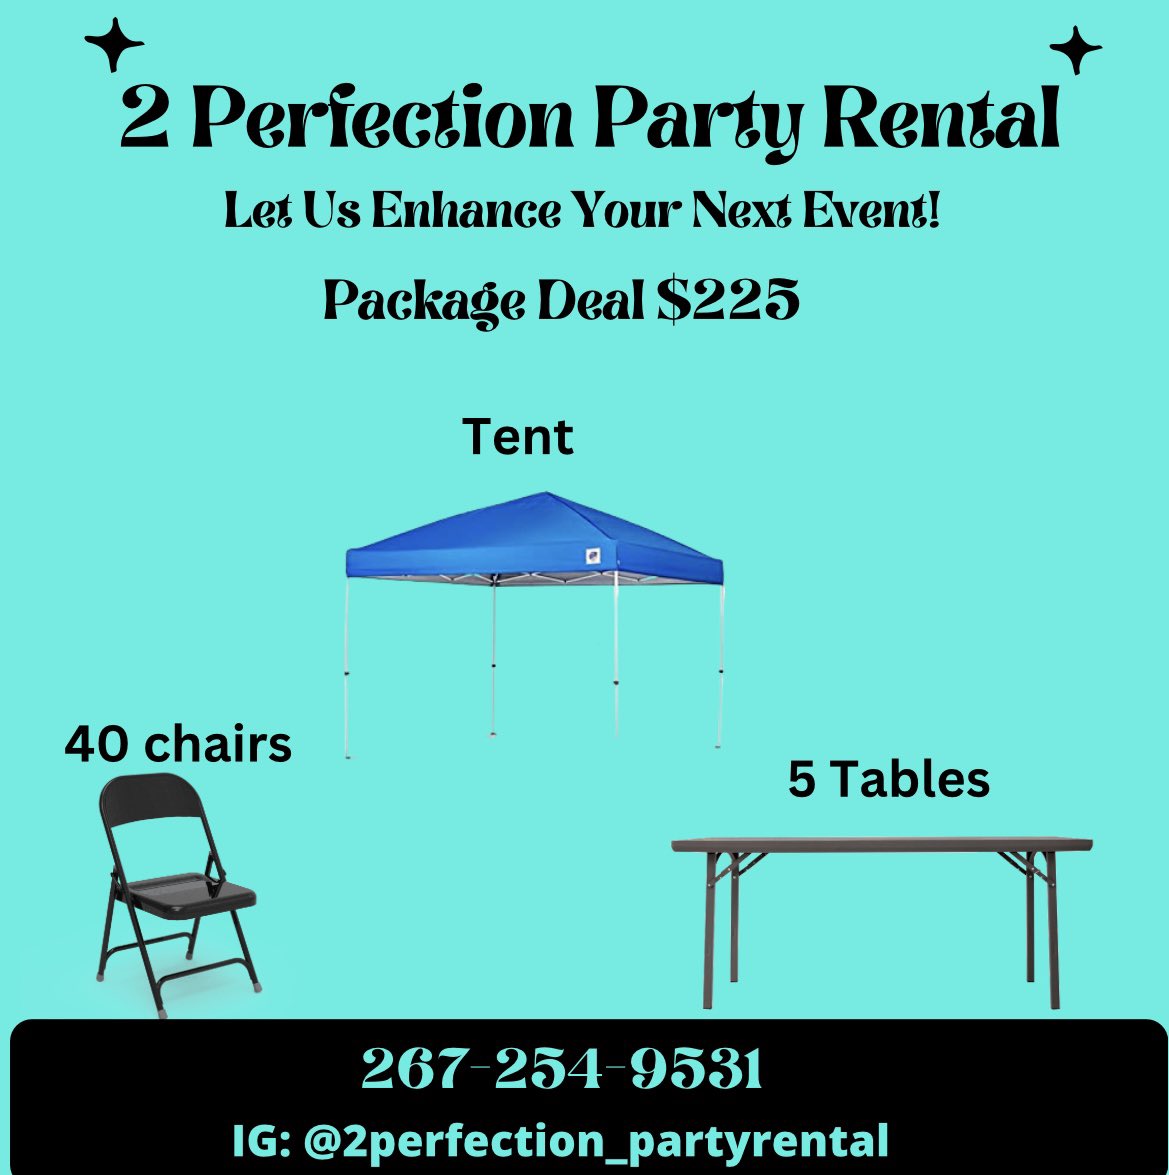 Rent our tents, tables and chairs for your next event  #partyrental #tents #tables  #chairs  #tablesandchairs #pom  #promsendoff #cottoncandy #popcorn #moonbounce #entertainment #events  #birthdayparty #cookout #familyreunion #bookwithme #philly #nj #de